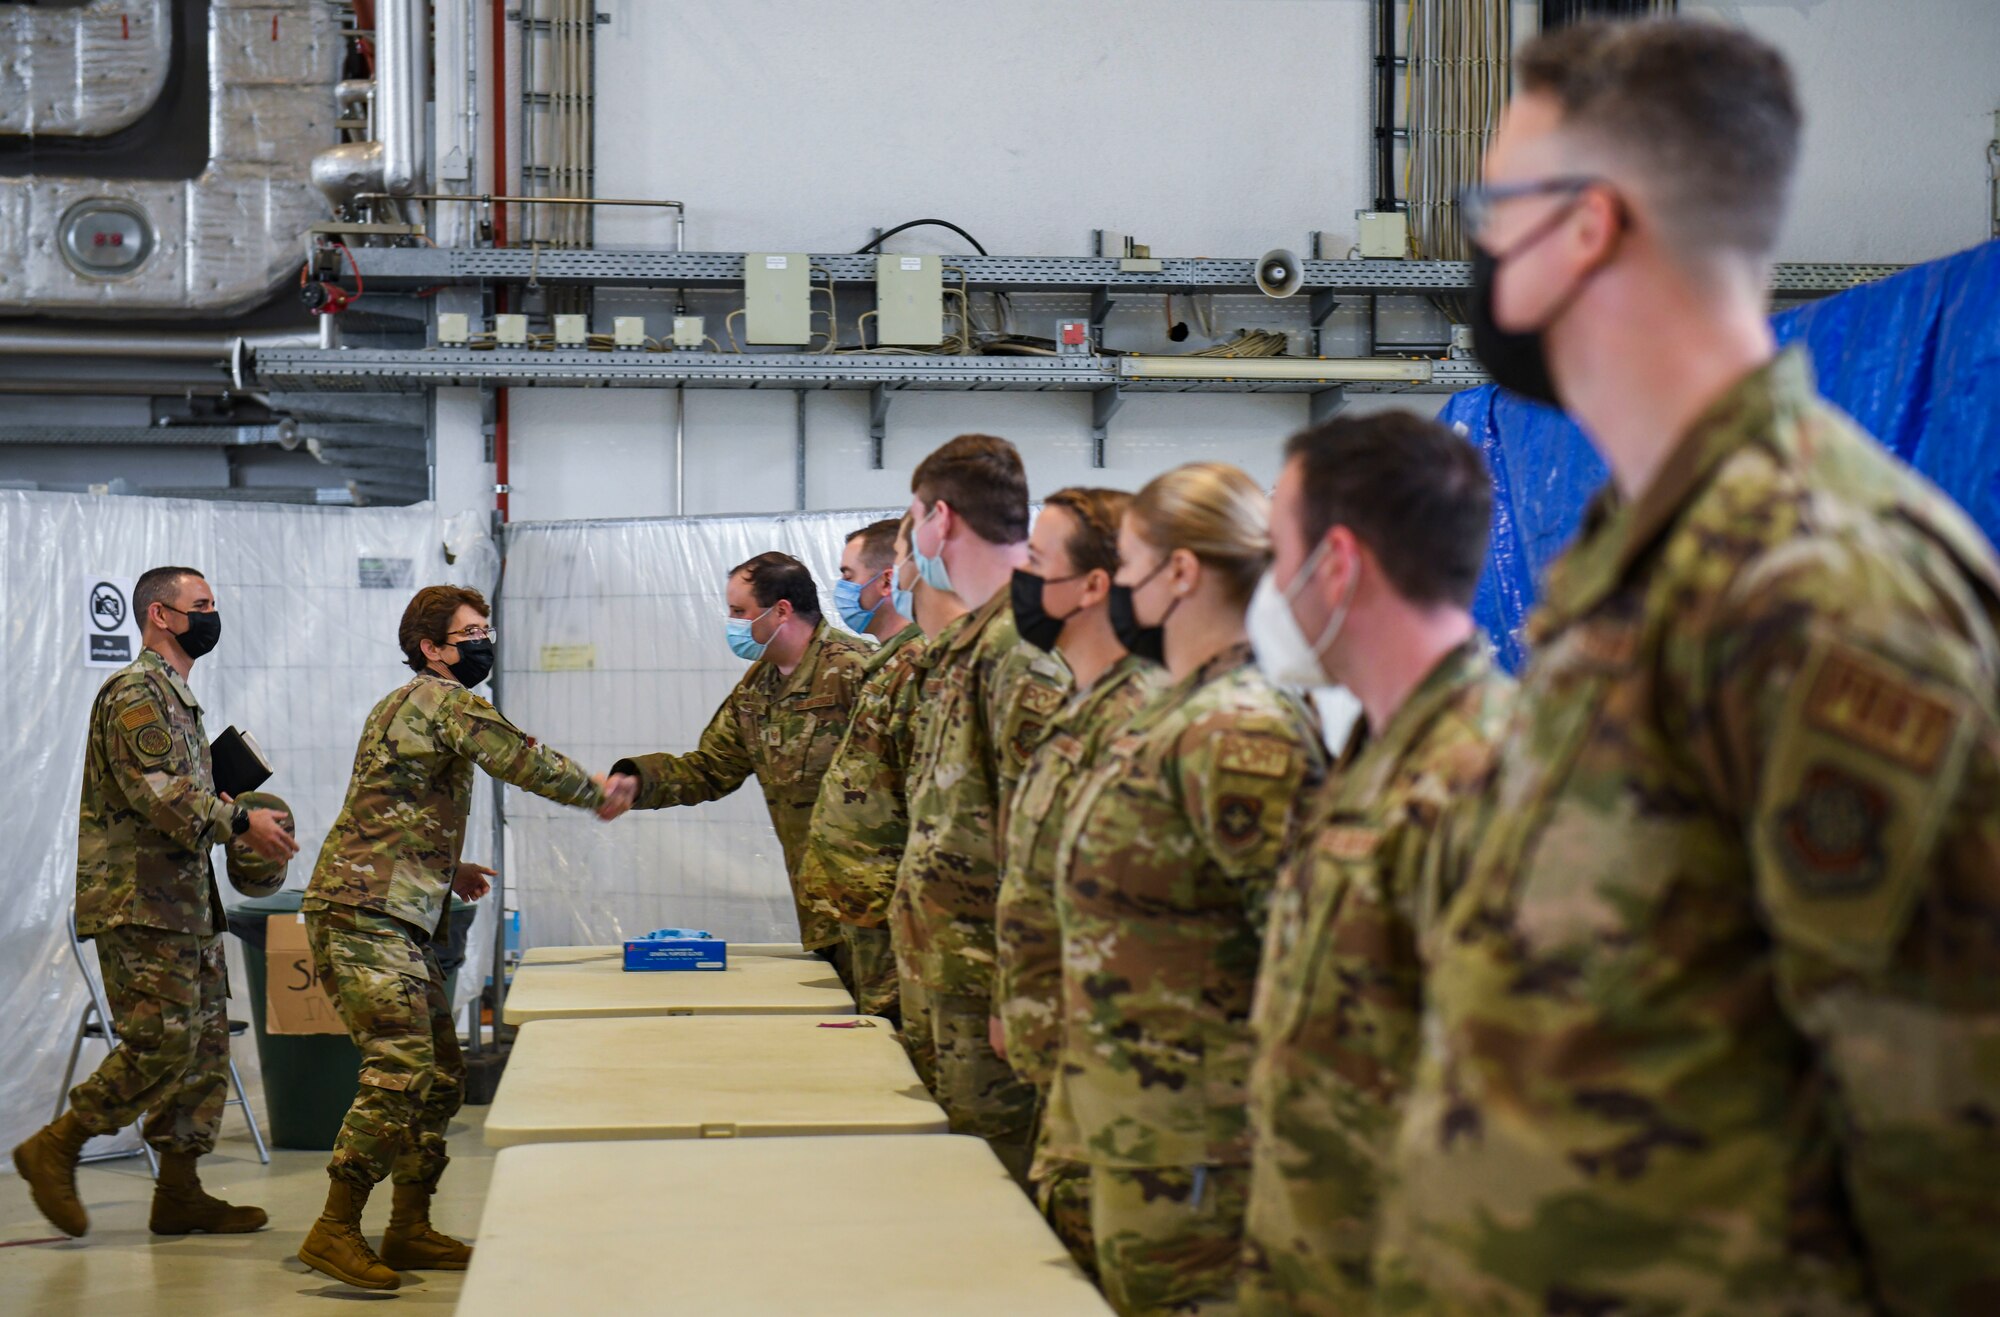 General shakes hands with Airmen.